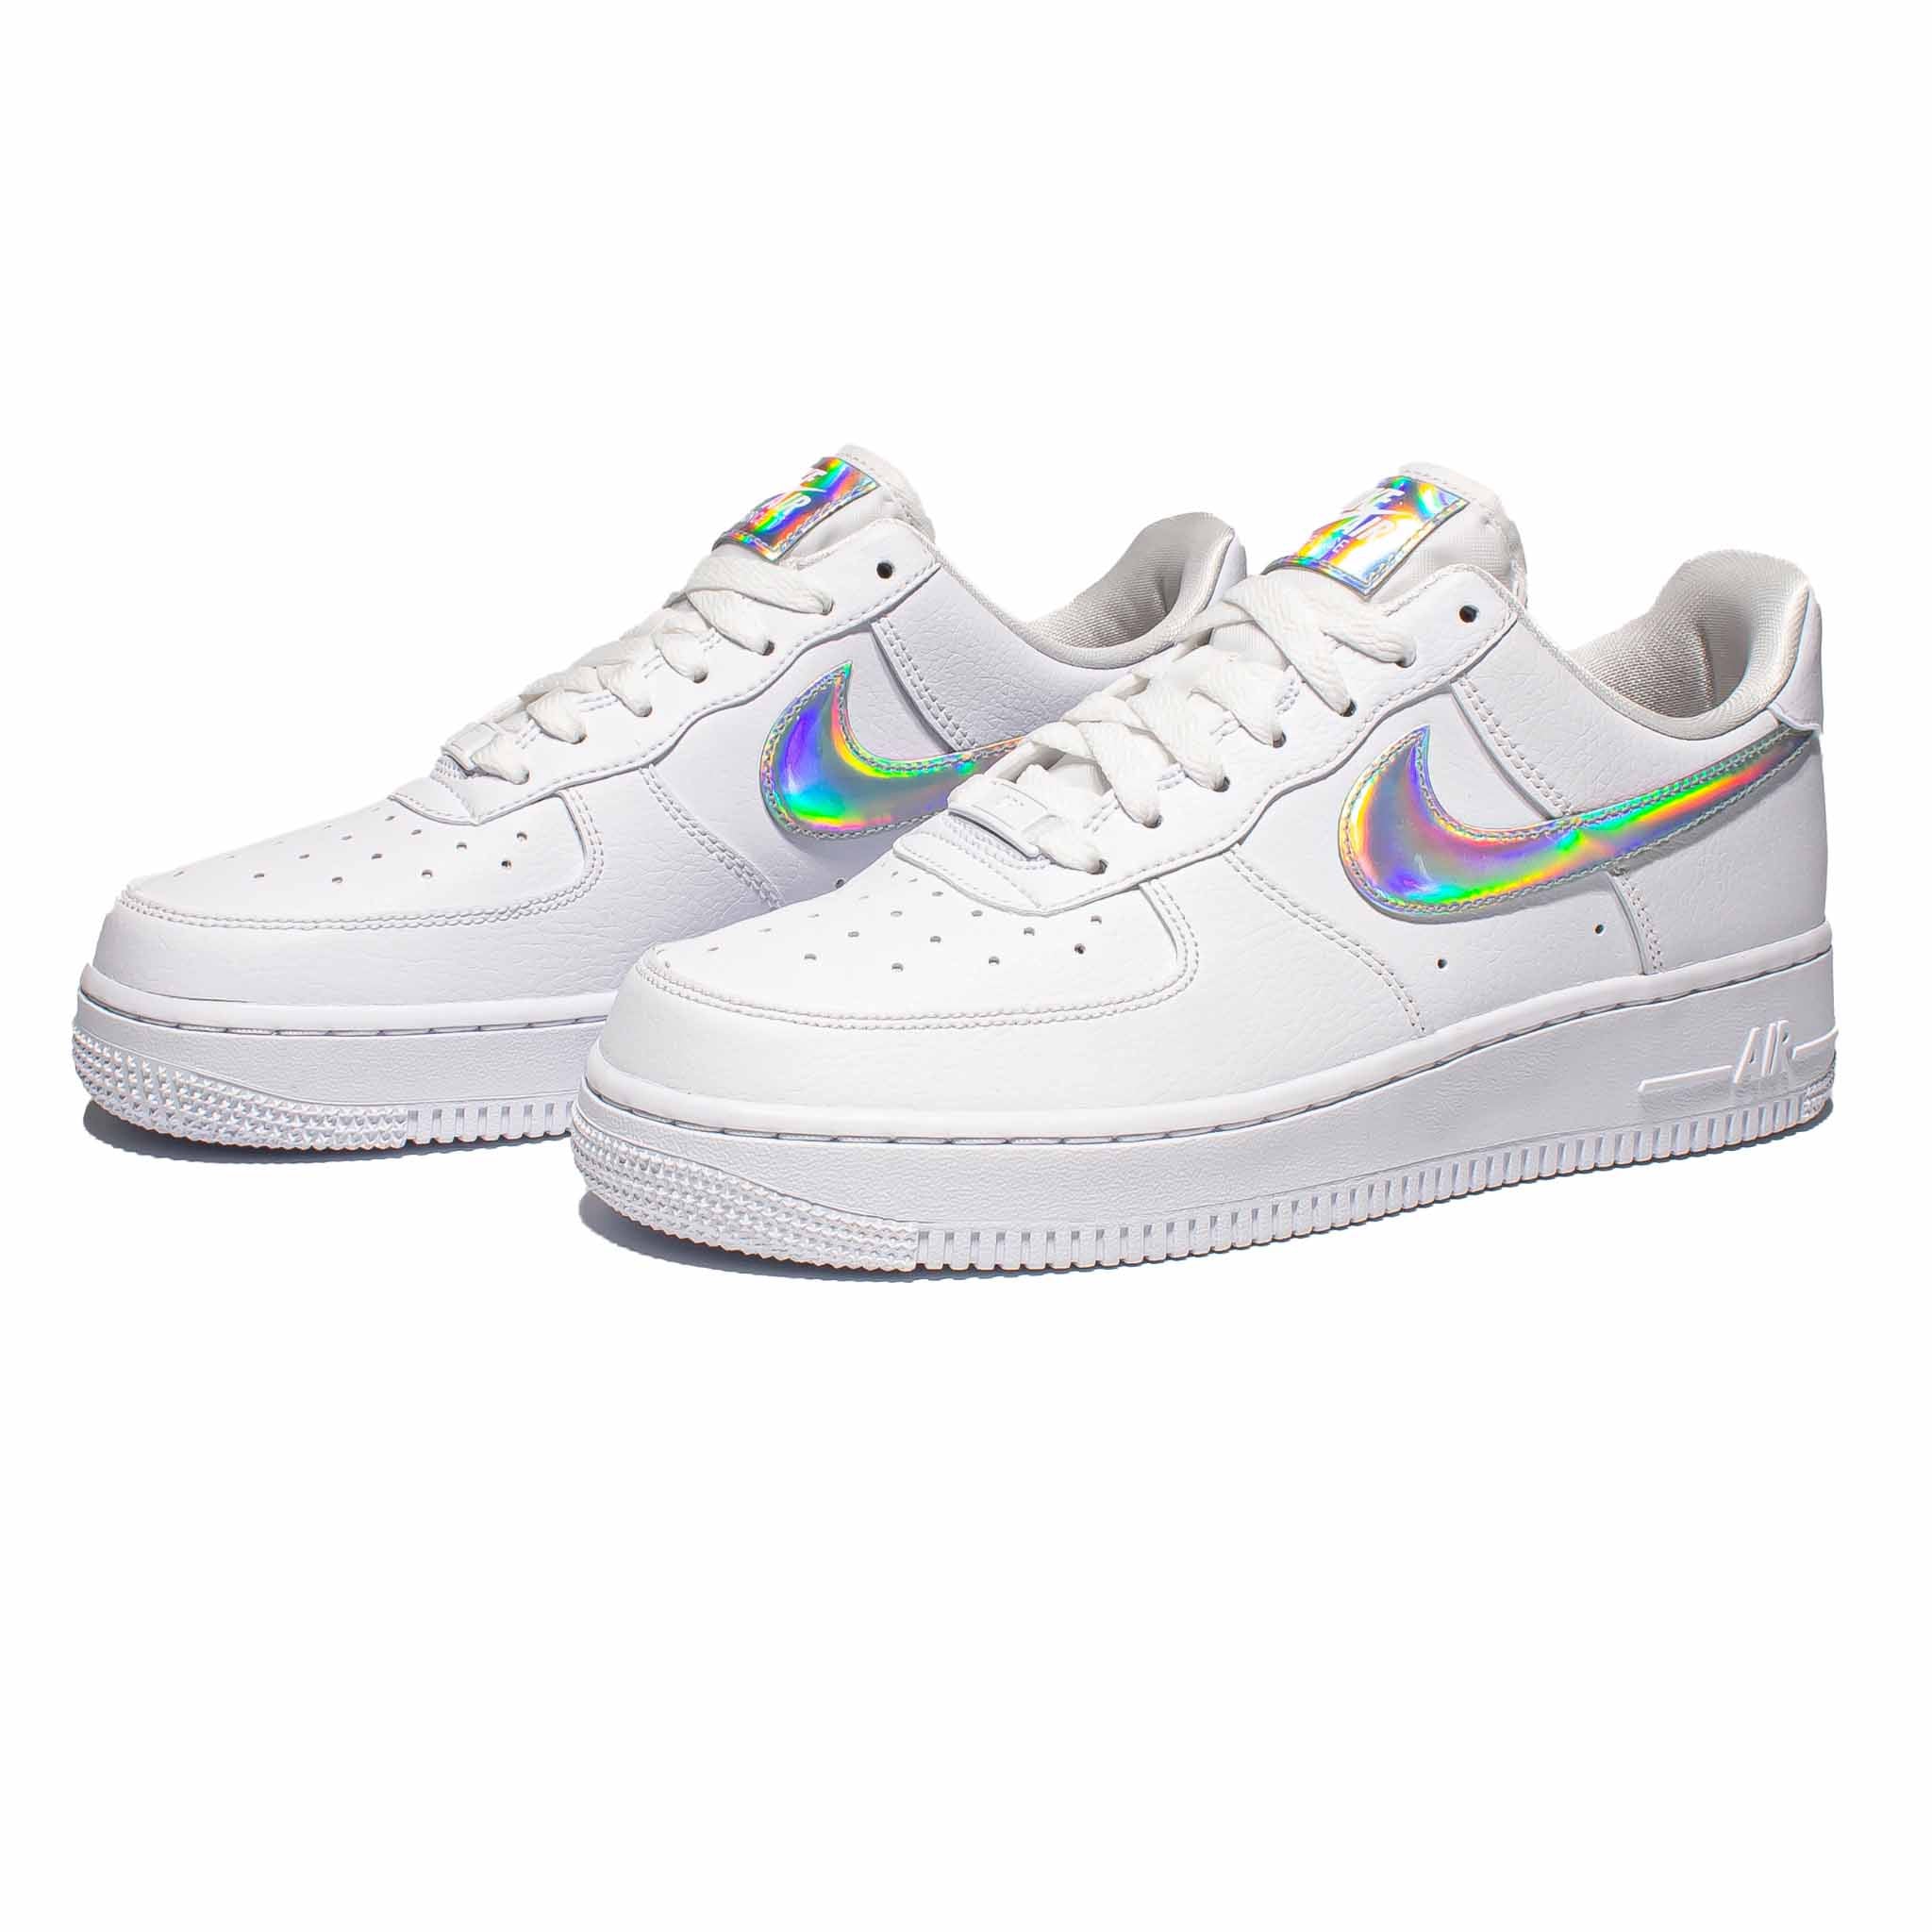 Nike Air Force 1 '07 Low 'Iridescent Swoosh' White